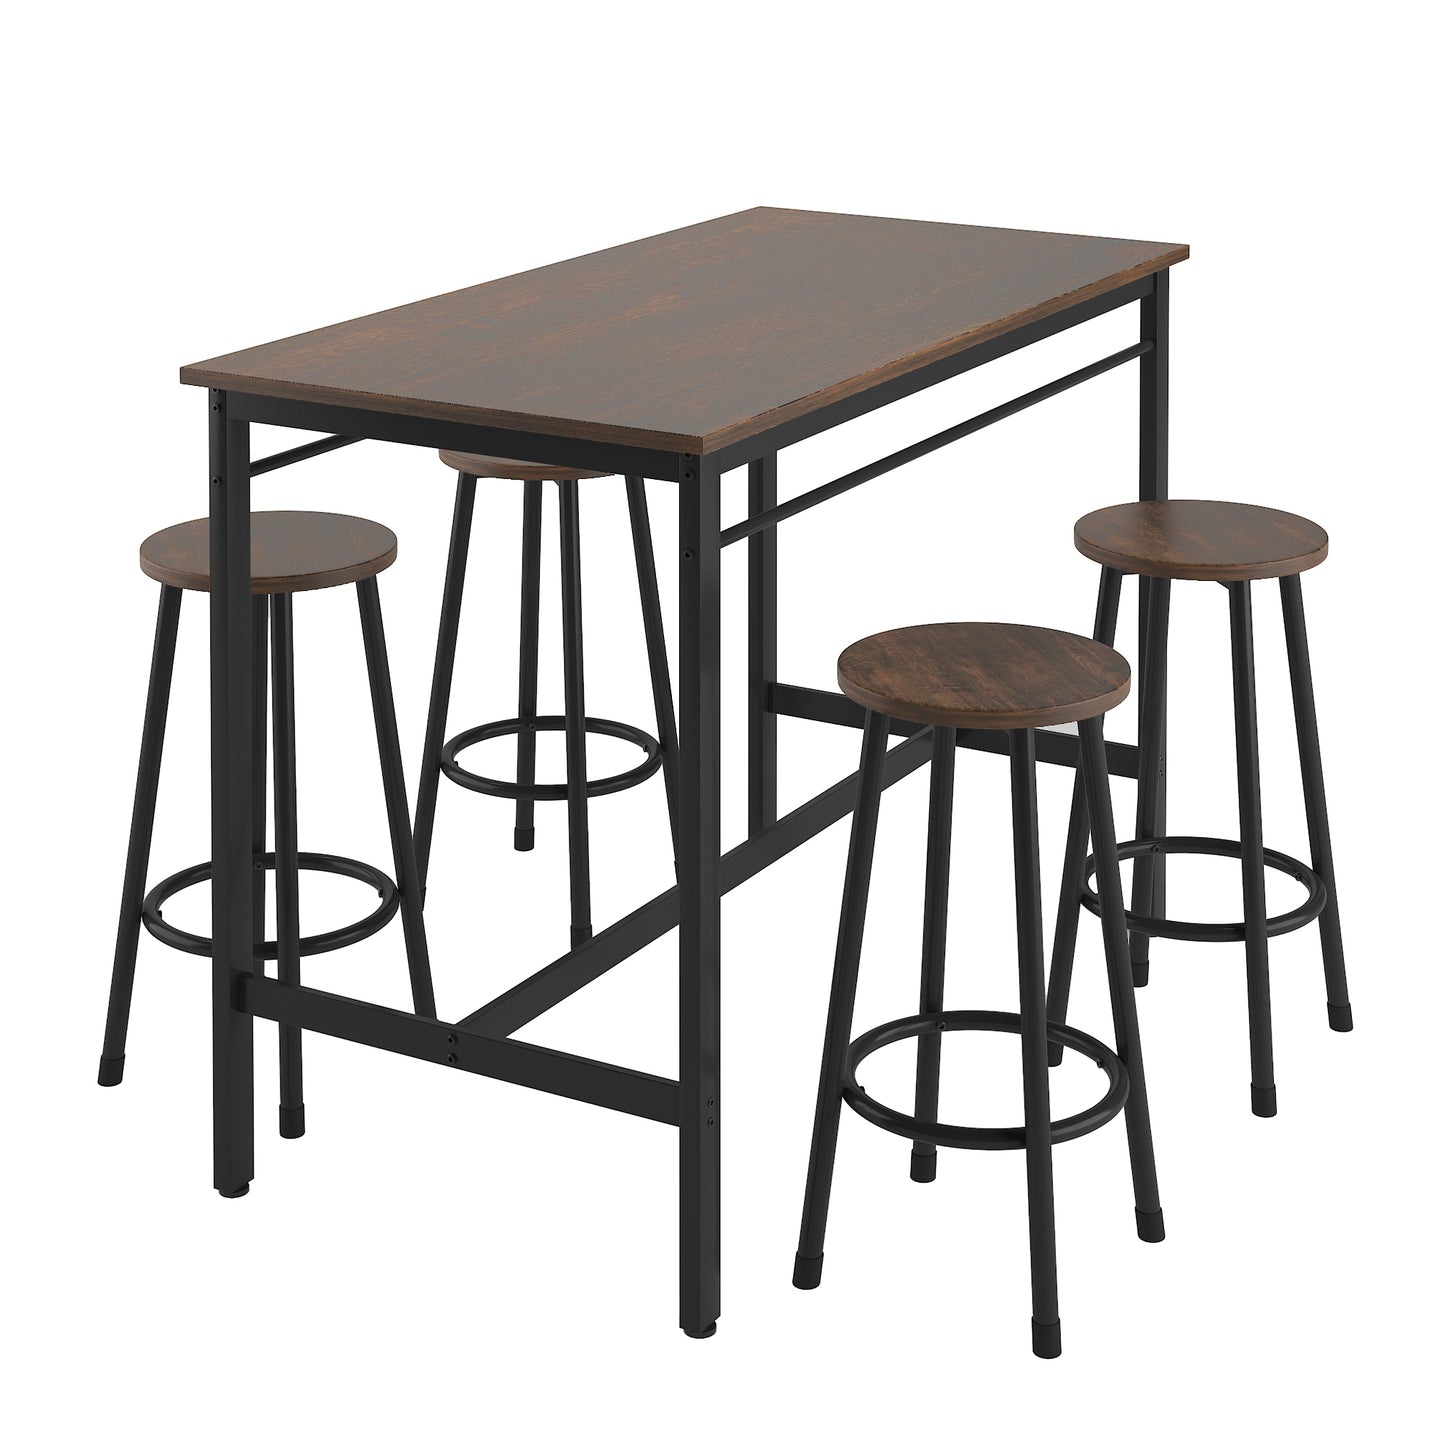 Counter Height Table Set of 5, Breakfast Bar Table and Stool Set, Minimalist Dining Table with Backless Stools, Wood Pub Table & Chair Set for Kitchen Apartment Bistro - Space Saving